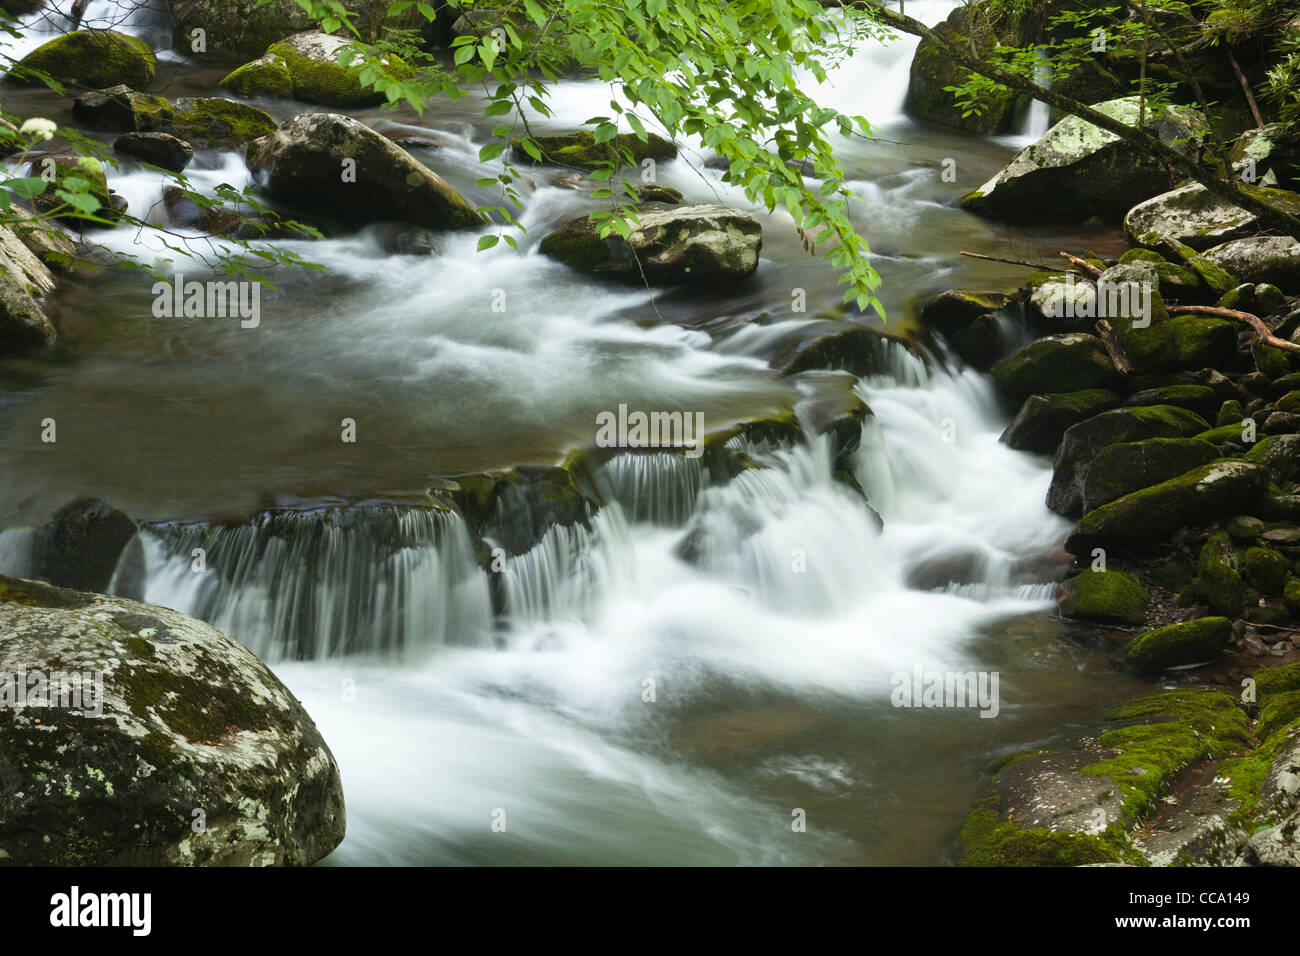 Rapids along the Middle Prong of Little River in the Tremont area of the Great Smoky Mountain National Park. Stock Photo